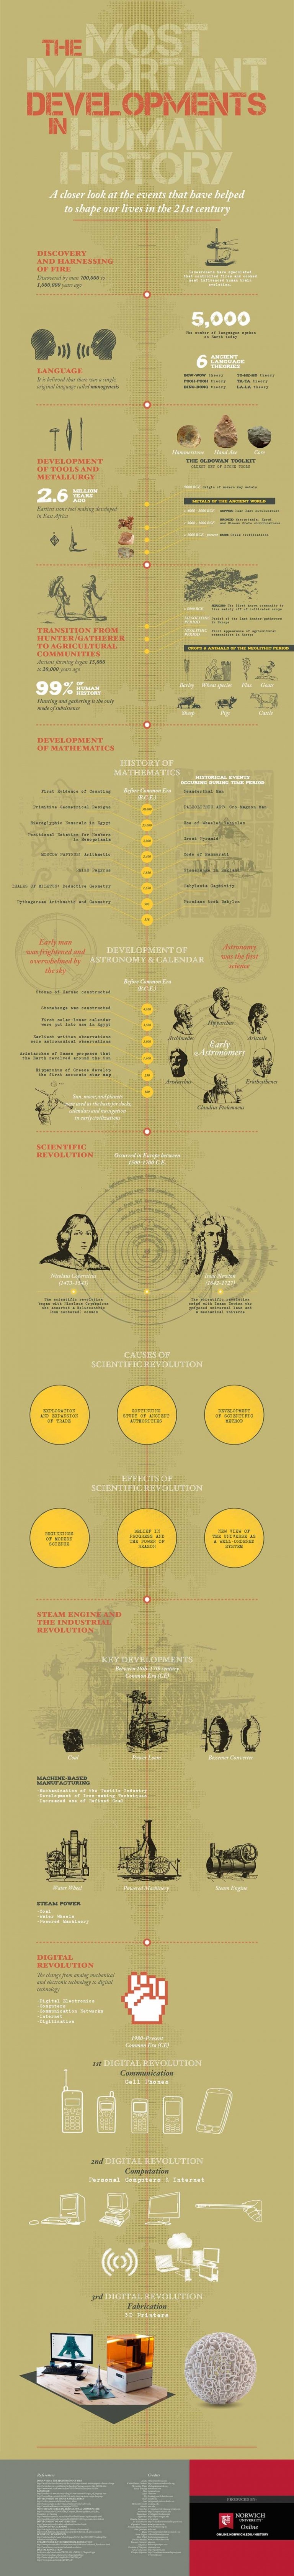 infographic - the most important developments in human history